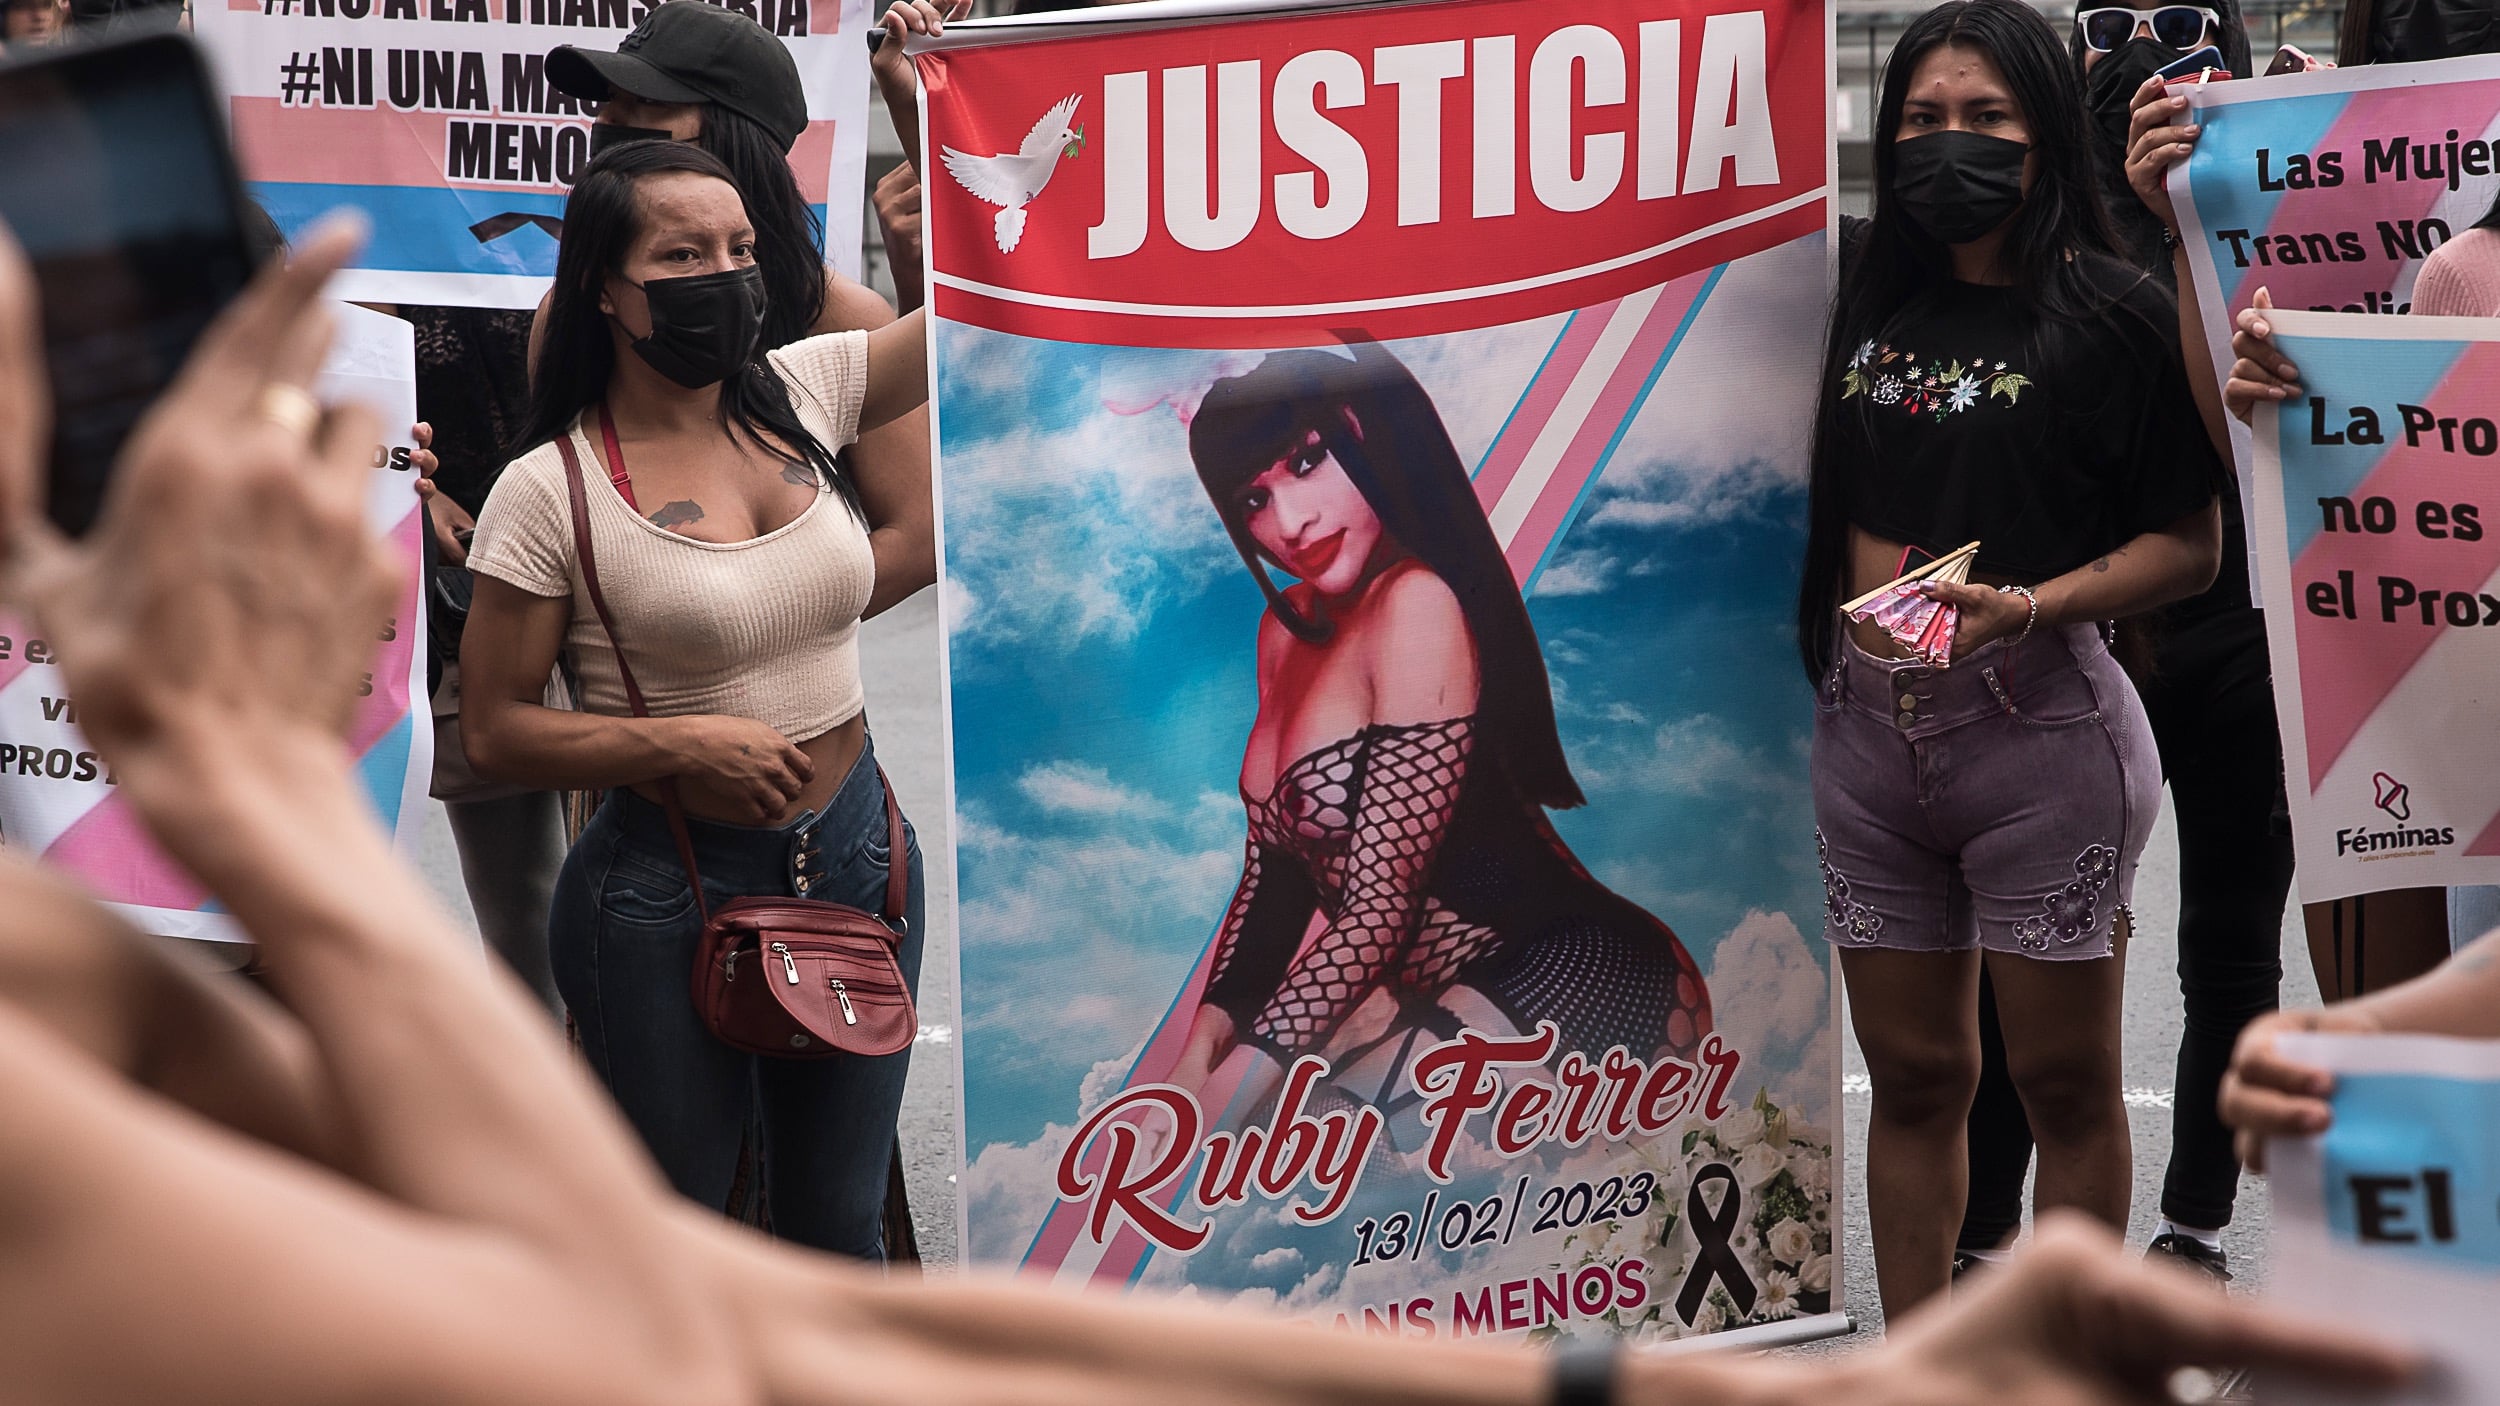 A group of transwomen protest outside the police station in downtown Lima, Peru on February.